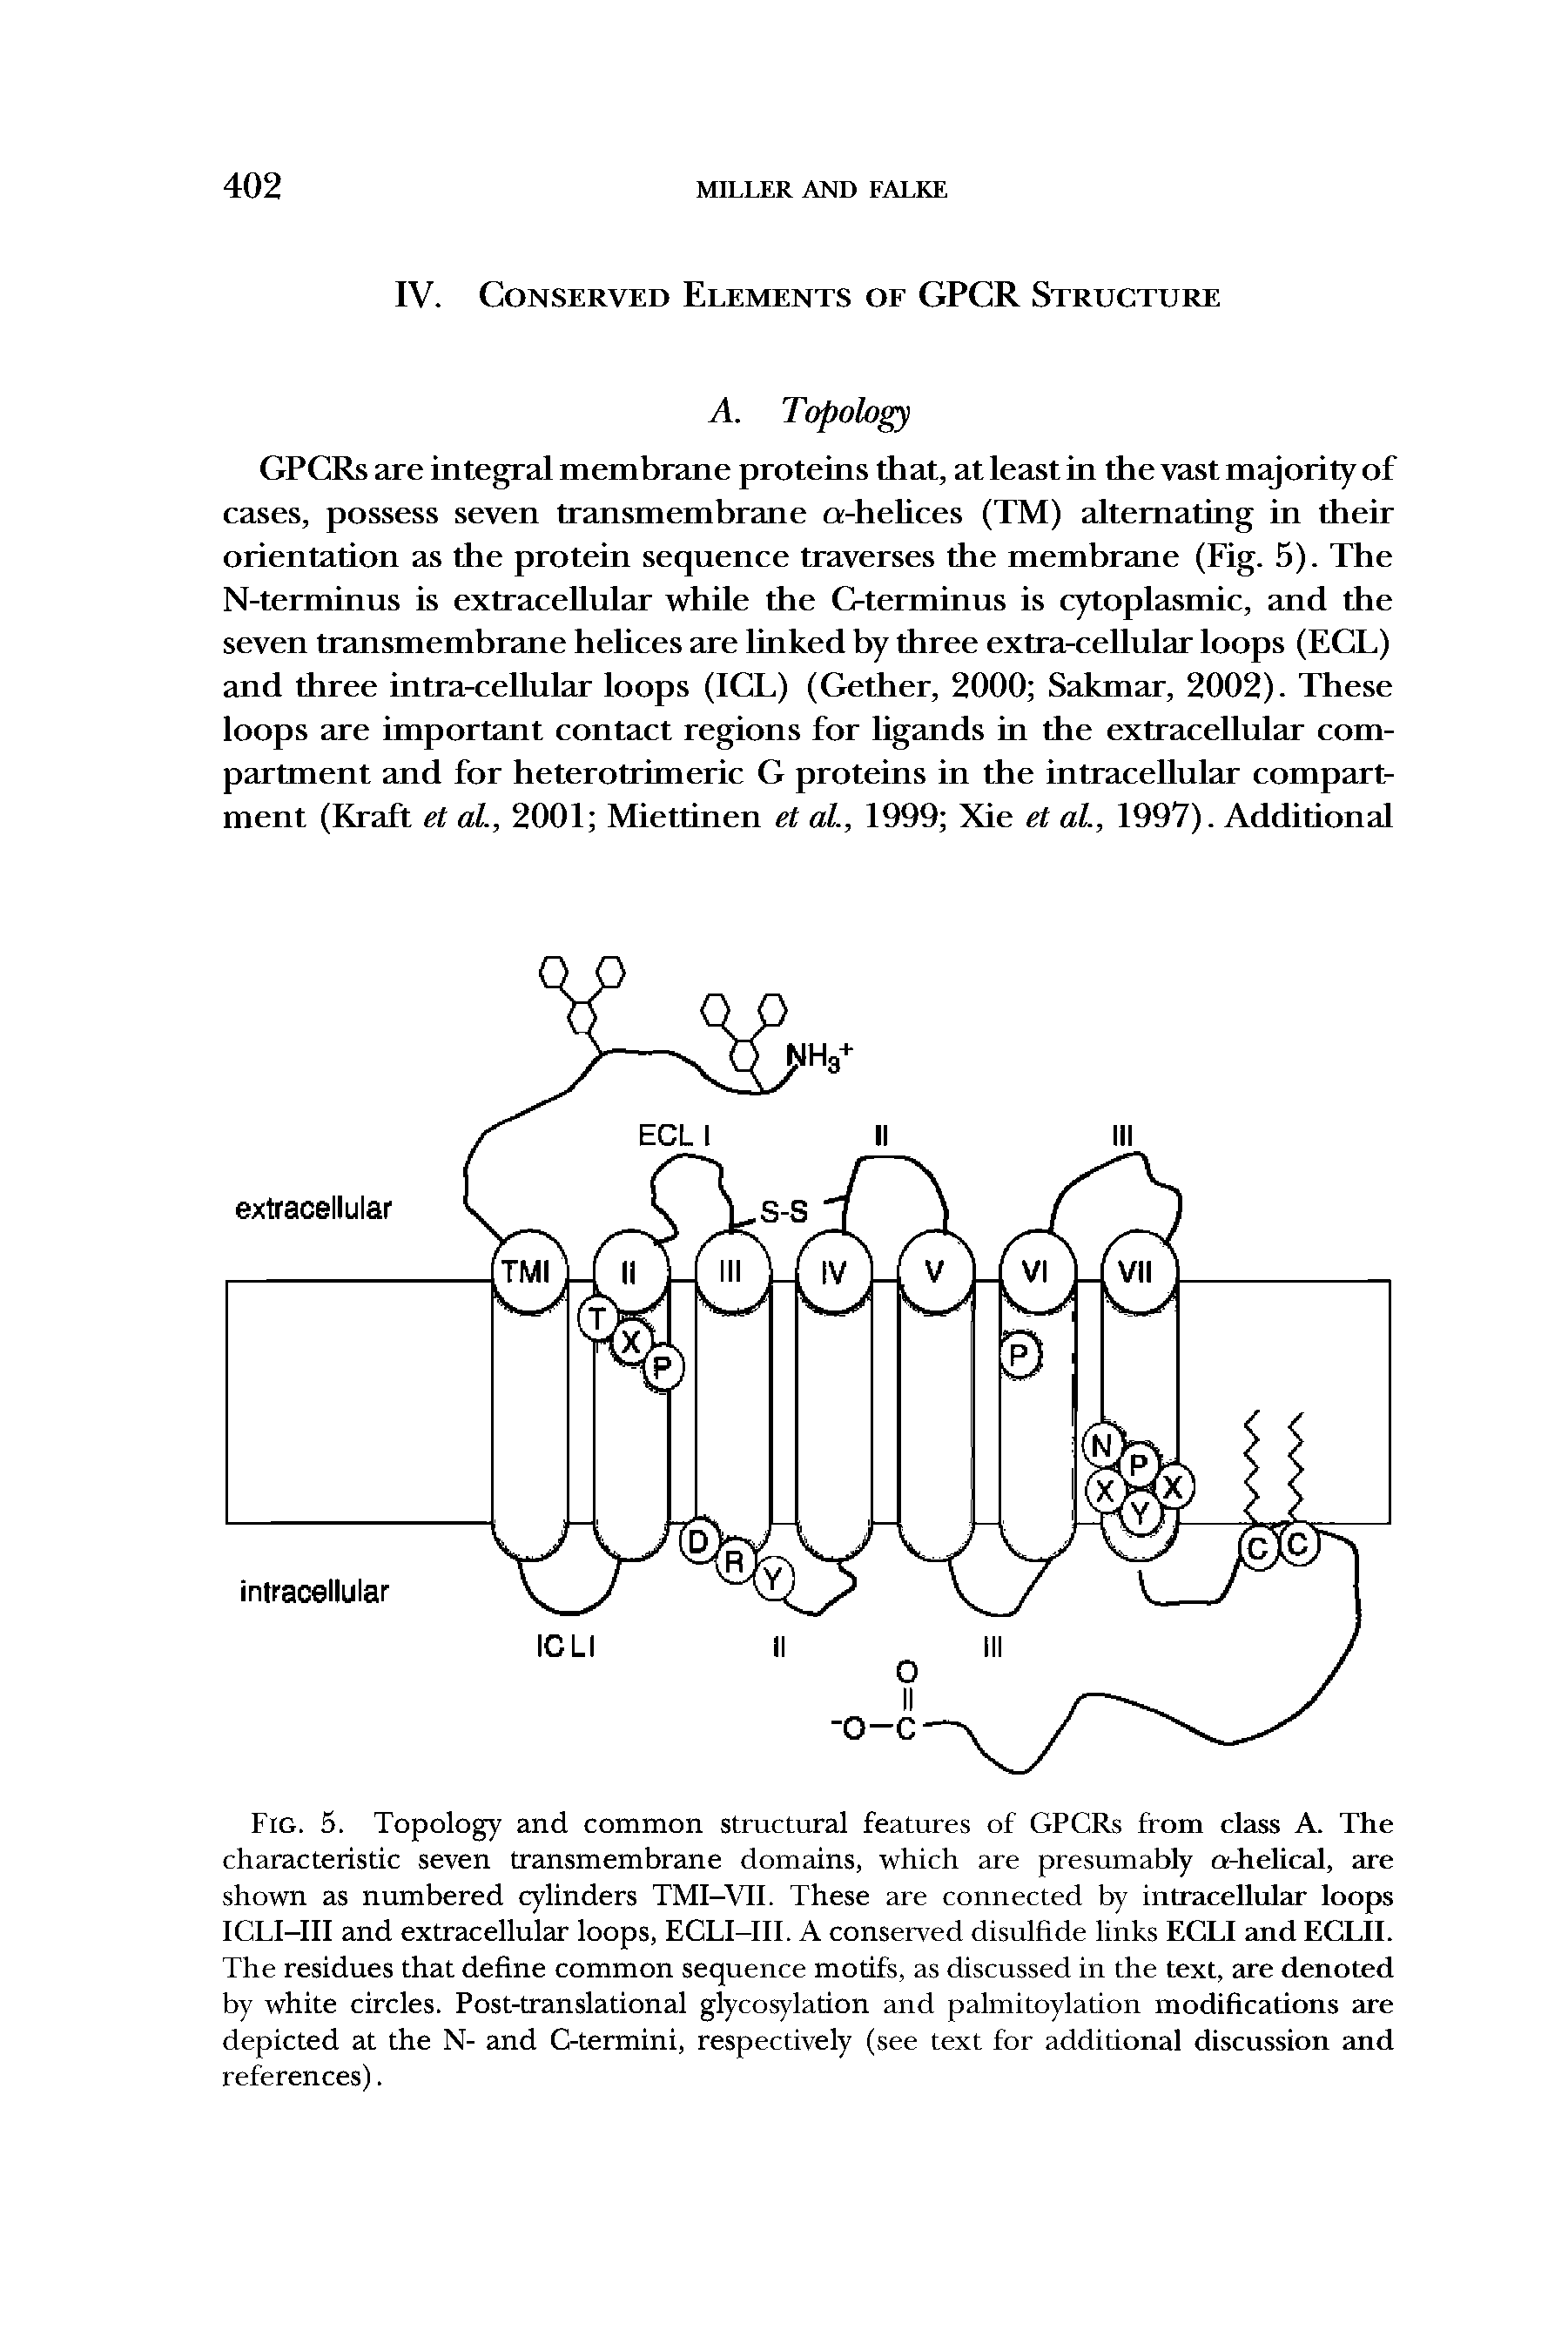 Fig. 5. Topology and common structural features of GPCRs from class A. The characteristic seven transmembrane domains, which are presumably a-helical, are shown as numbered cylinders TMI-VII. These are connected by intracellular loops ICLI-III and extracellular loops, ECLI-III. A conserved disulfide links ECLI and ECLII. The residues that define common sequence motifs, as discussed in the text, are denoted by white circles. Post-translational glycosylation and palmitoylation modifications are depicted at the N- and C-termini, respectively (see text for additional discussion and references).